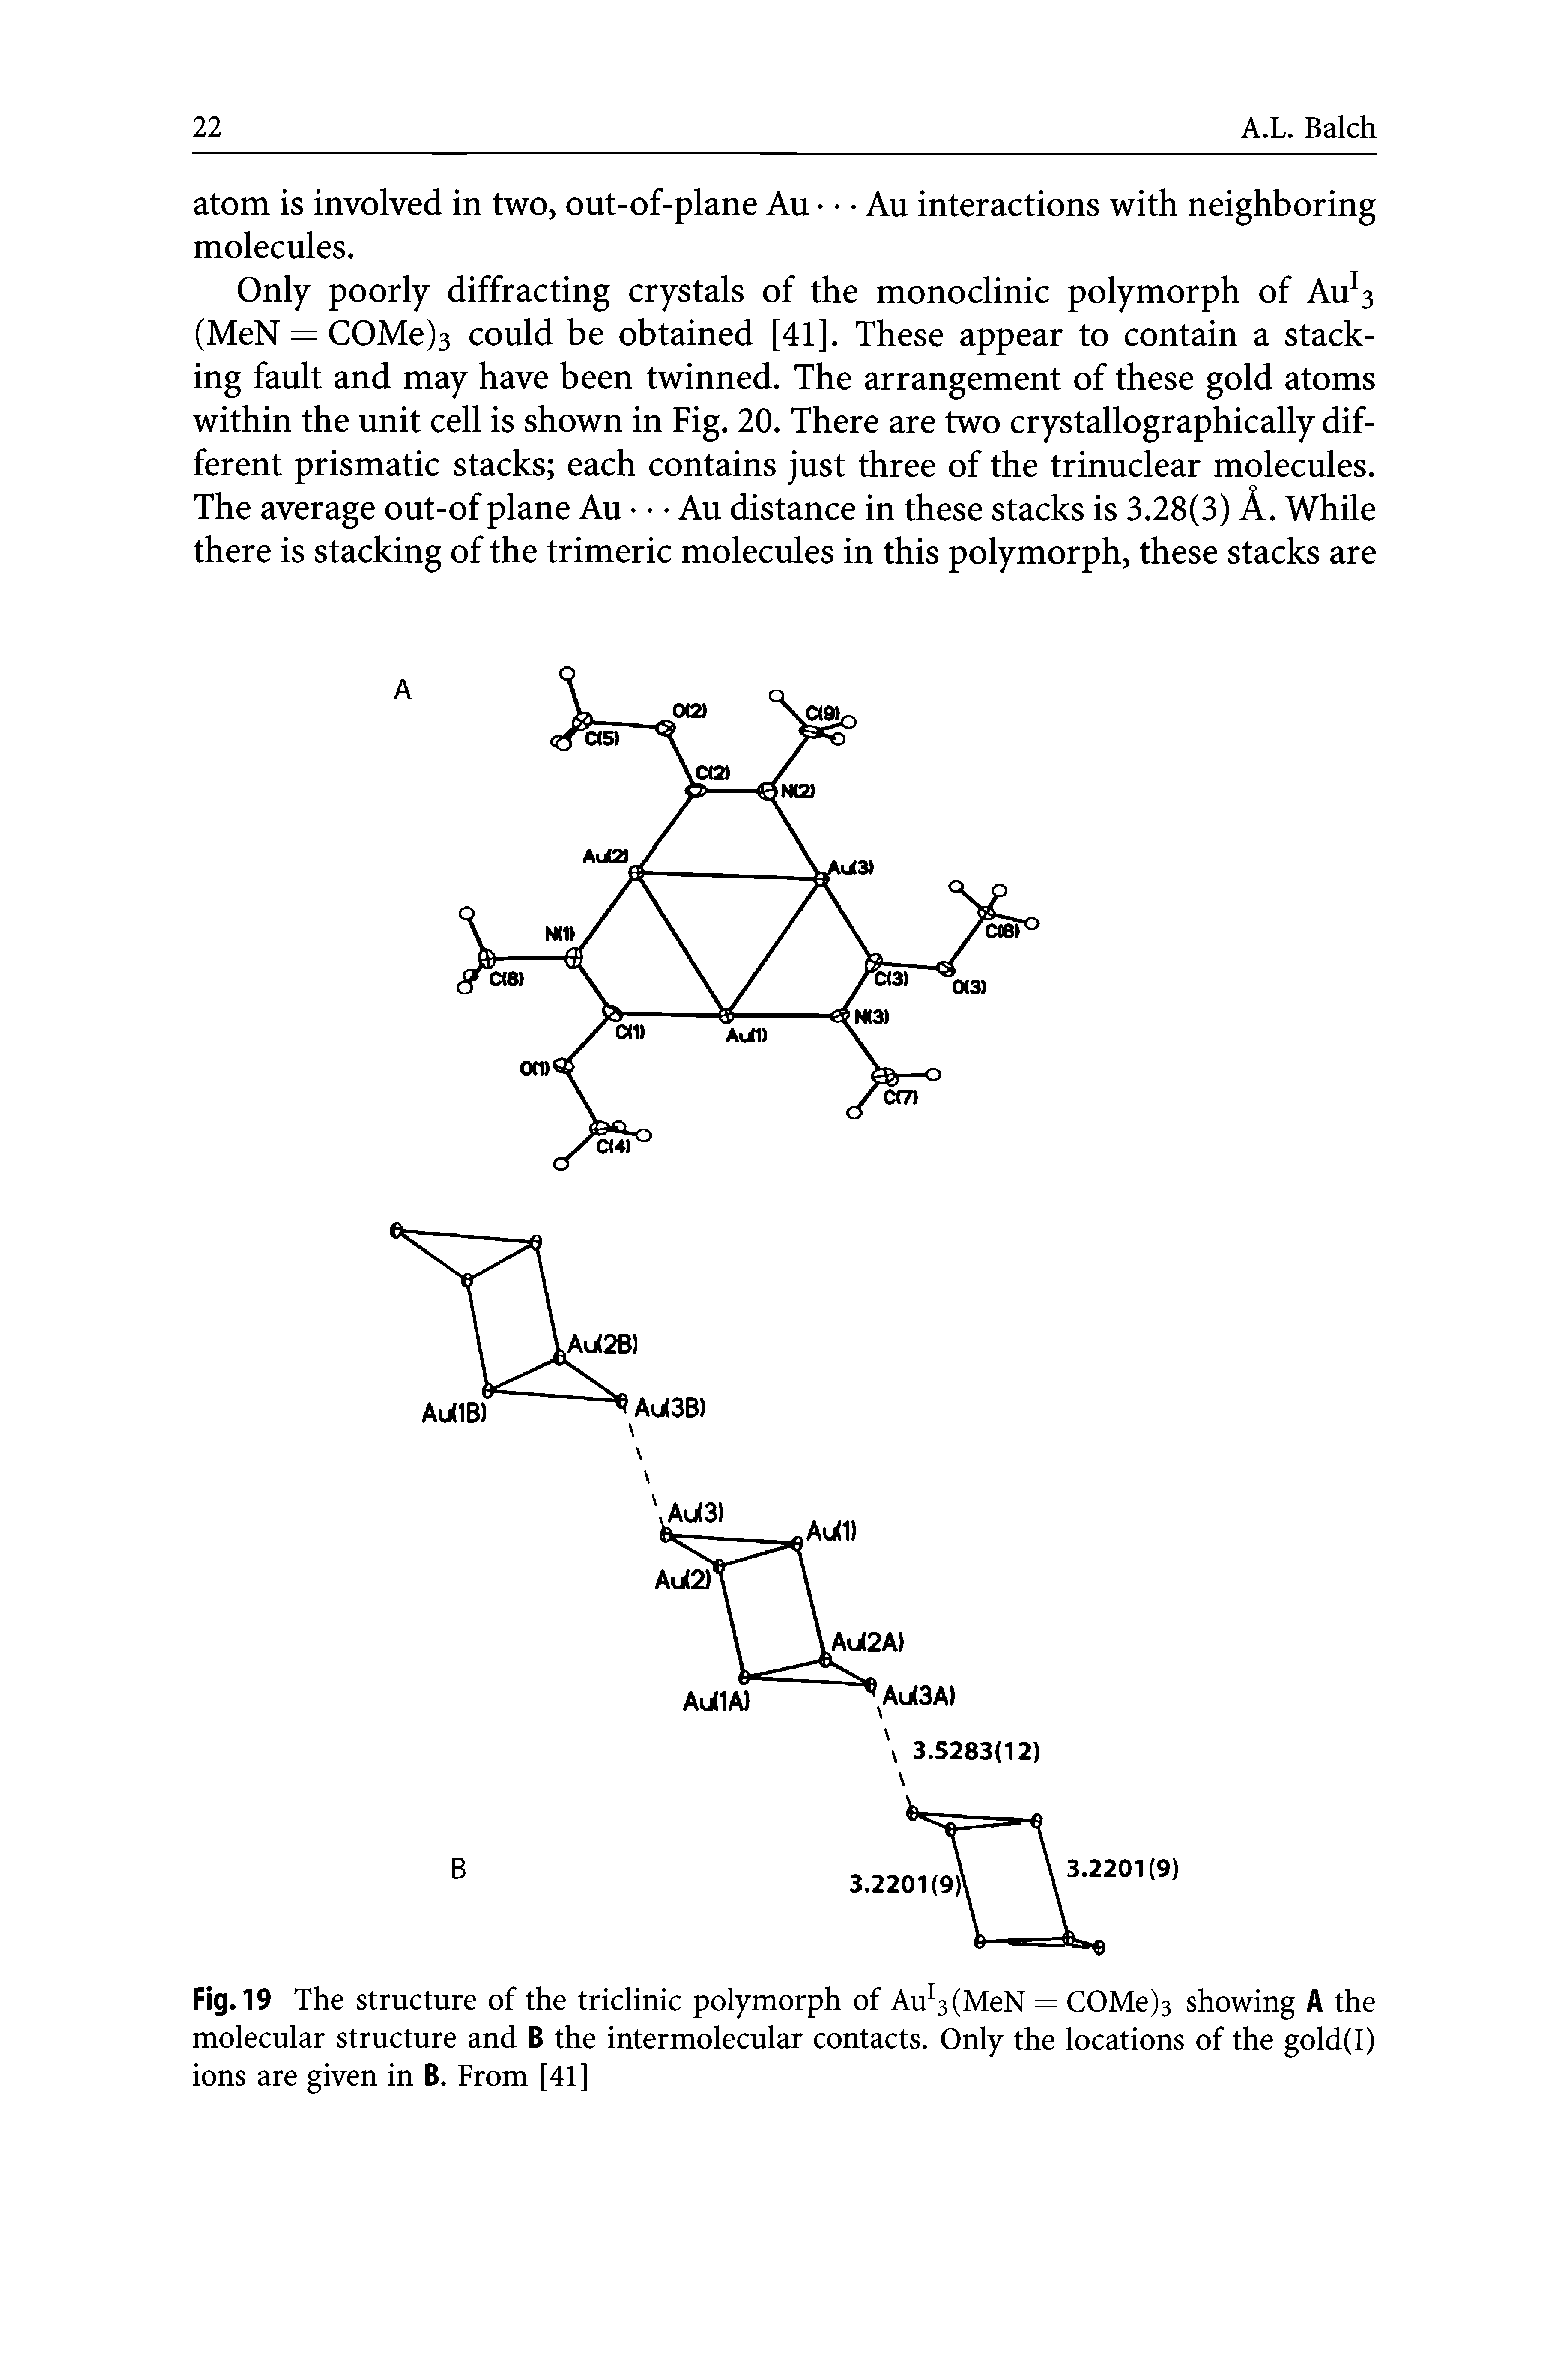 Fig. 19 The structure of the triclinic polymorph of Au MeN = COMe)3 showing A the molecular structure and B the intermolecular contacts. Only the locations of the gold(I) ions are given in B. From [41]...